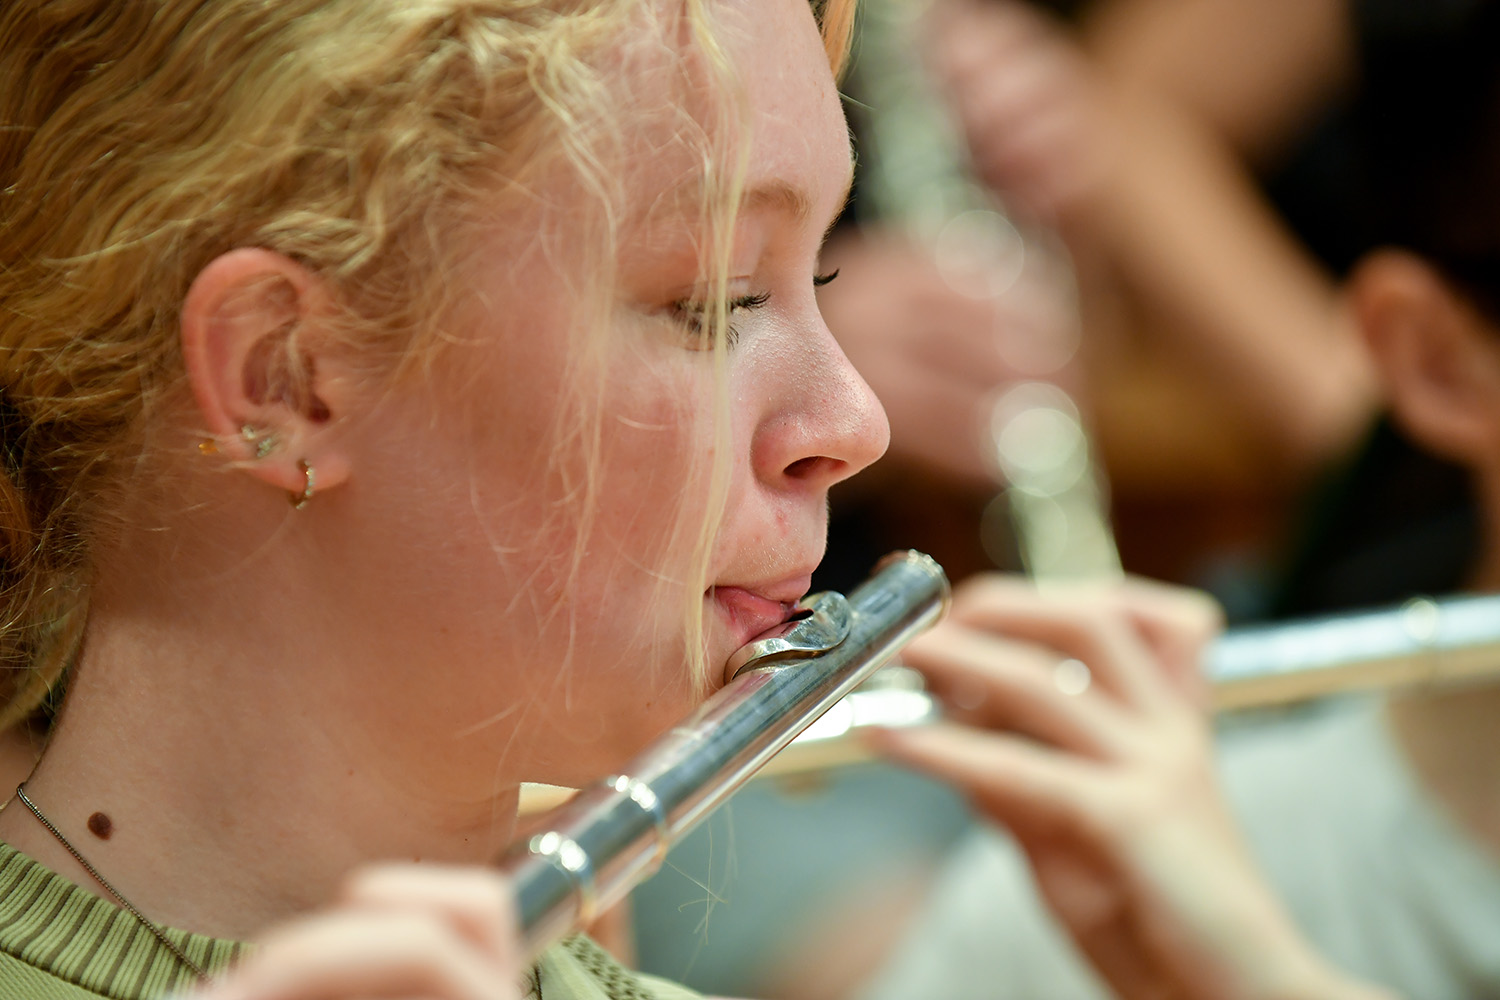 A close up image of a flute player from the Junior Department performing